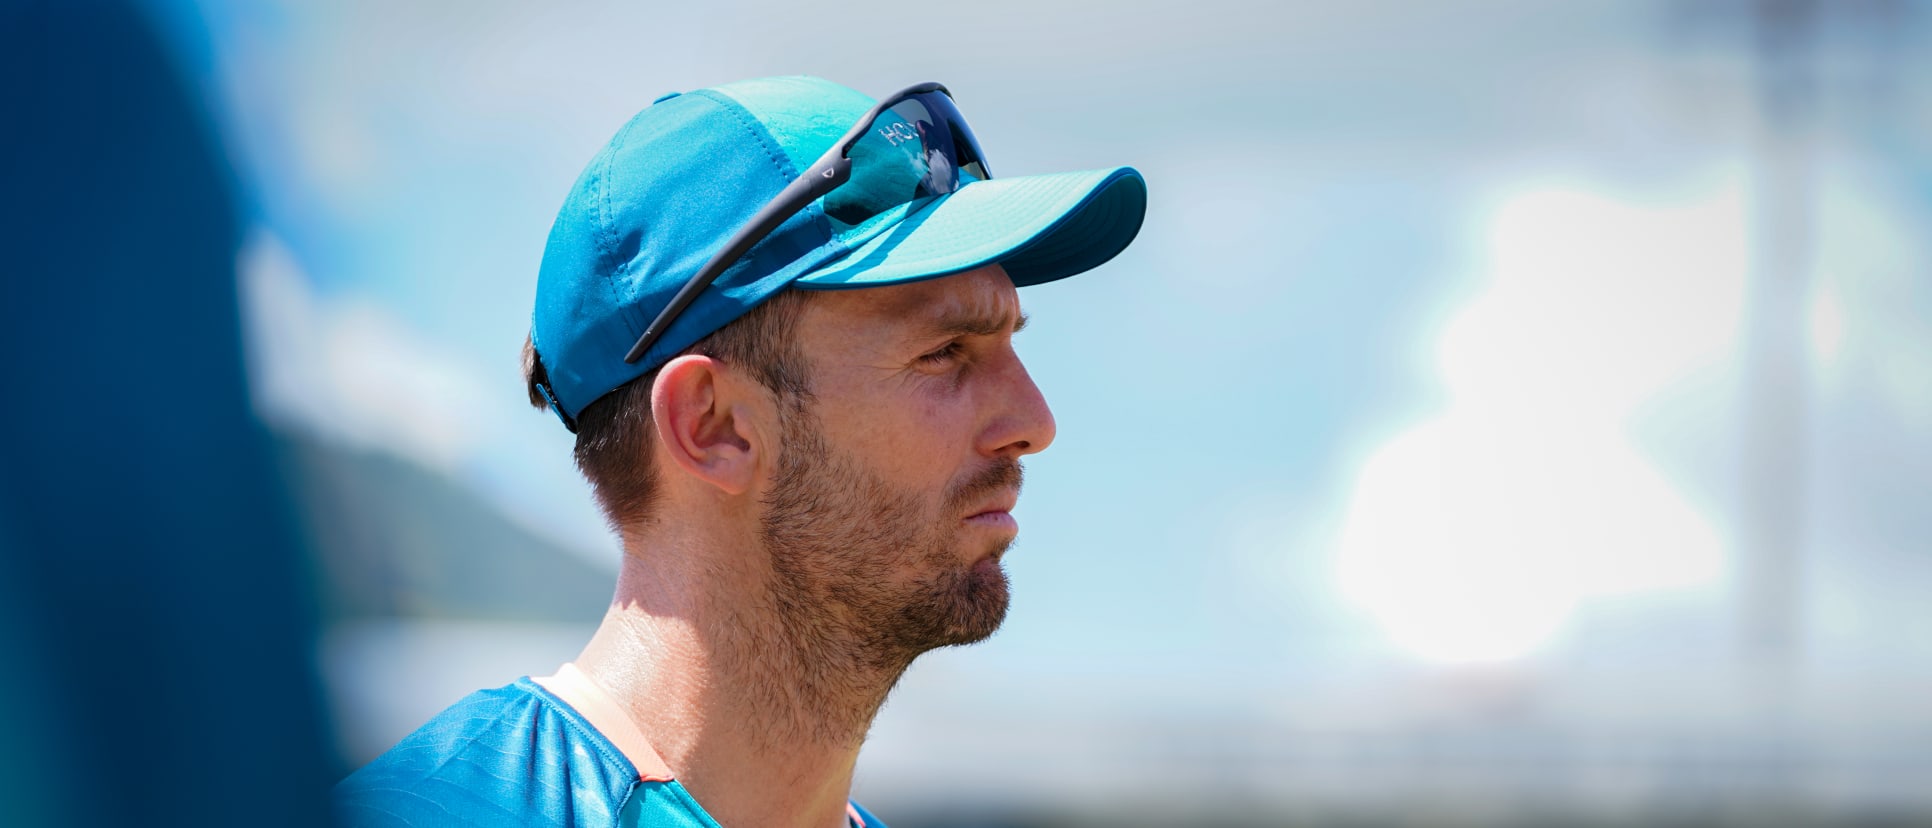 Australia captain provides injury update ahead of T20 World Cup